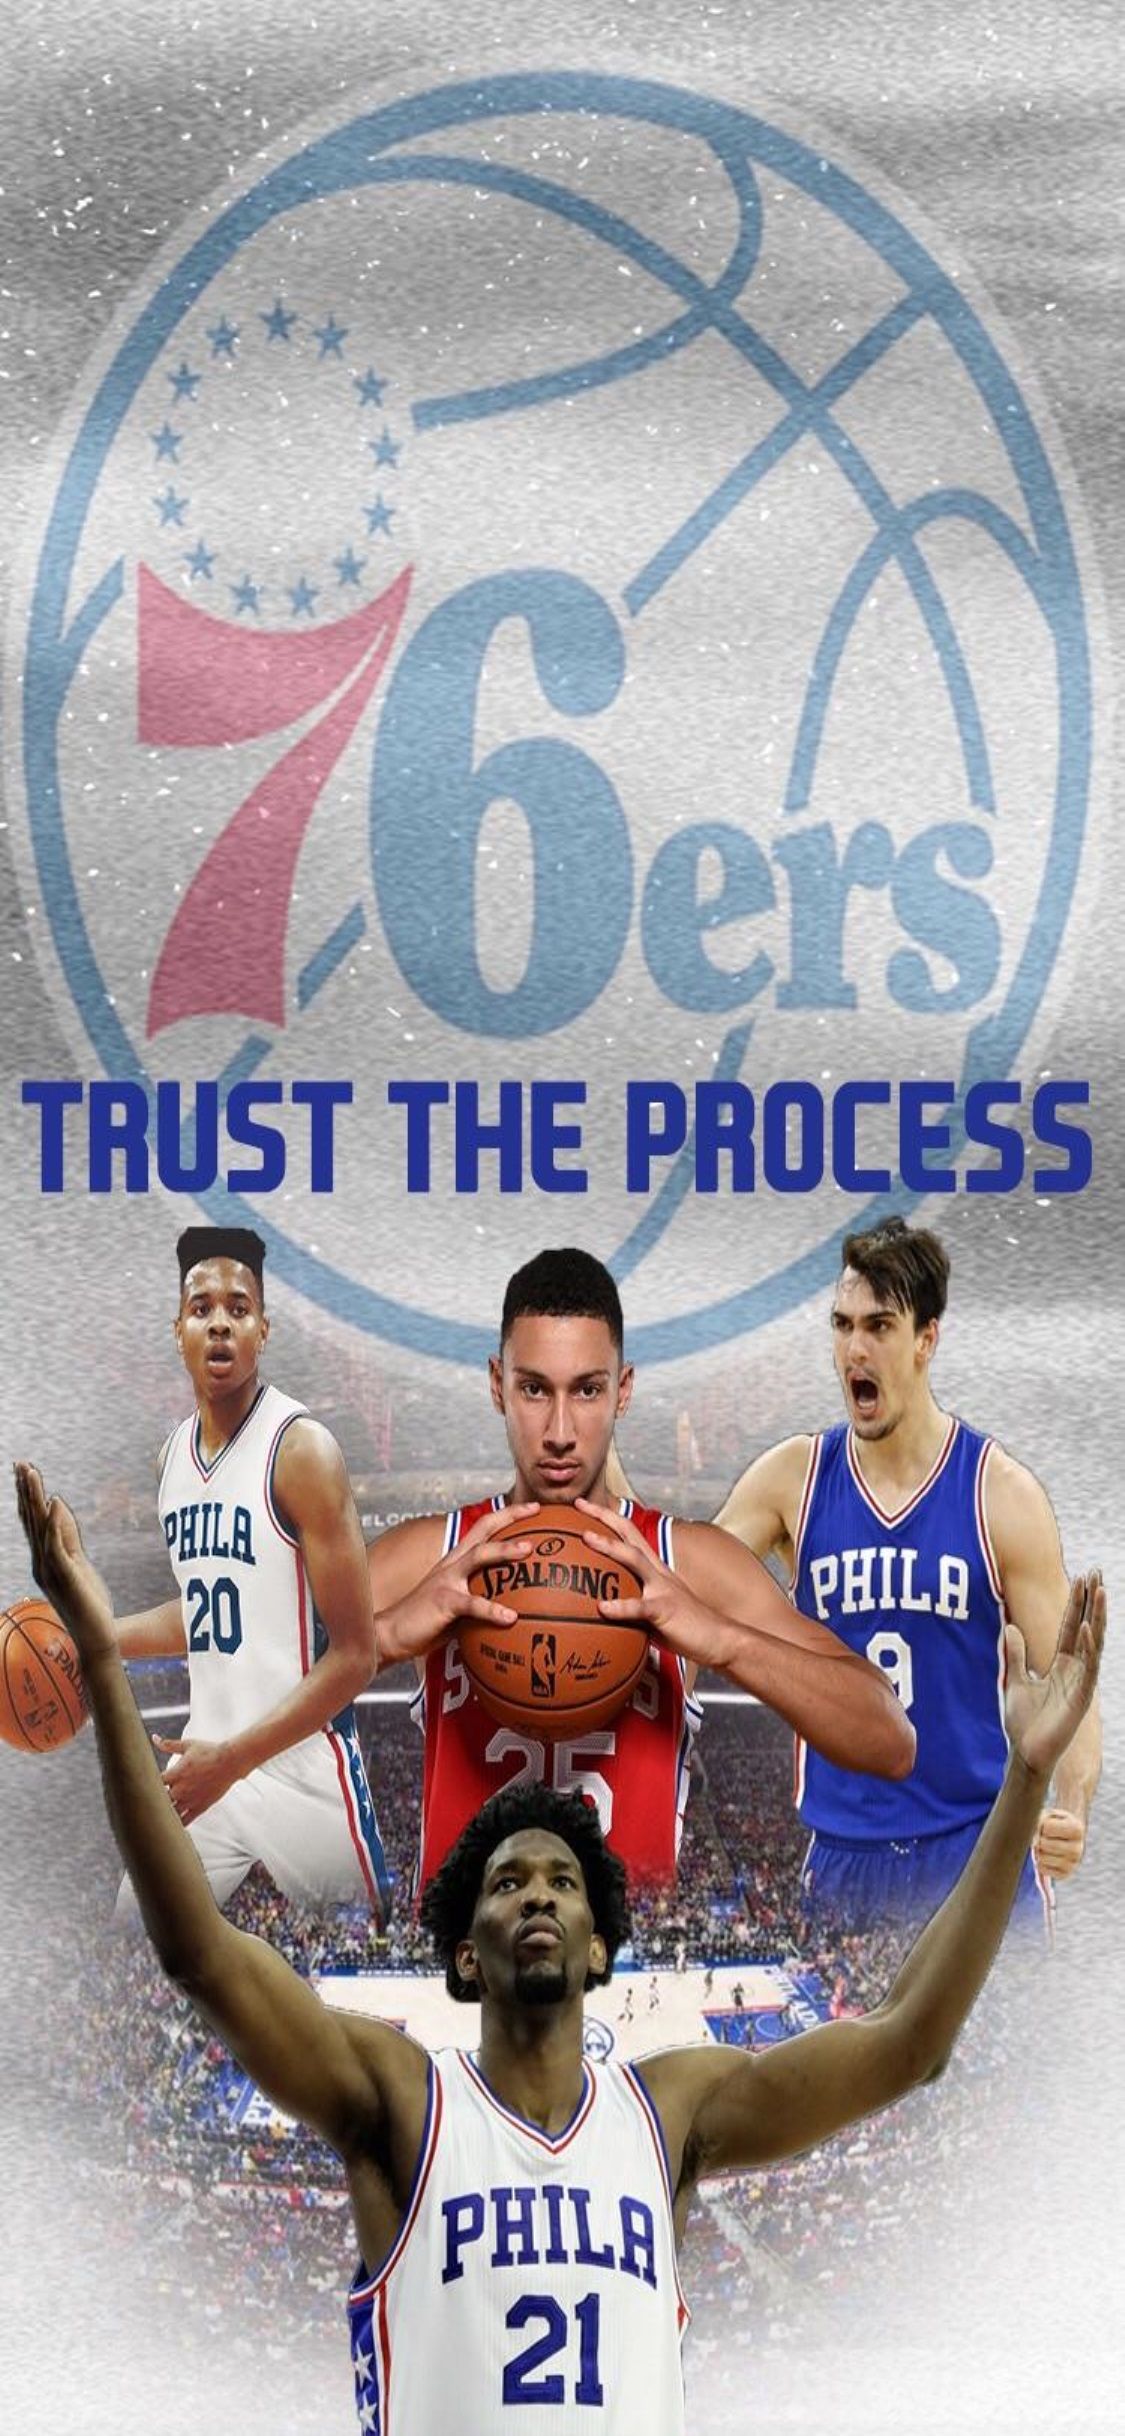 HD 76ers iphone x wallpaper and image collection for Desktop & Mobile. Free wallpaper download